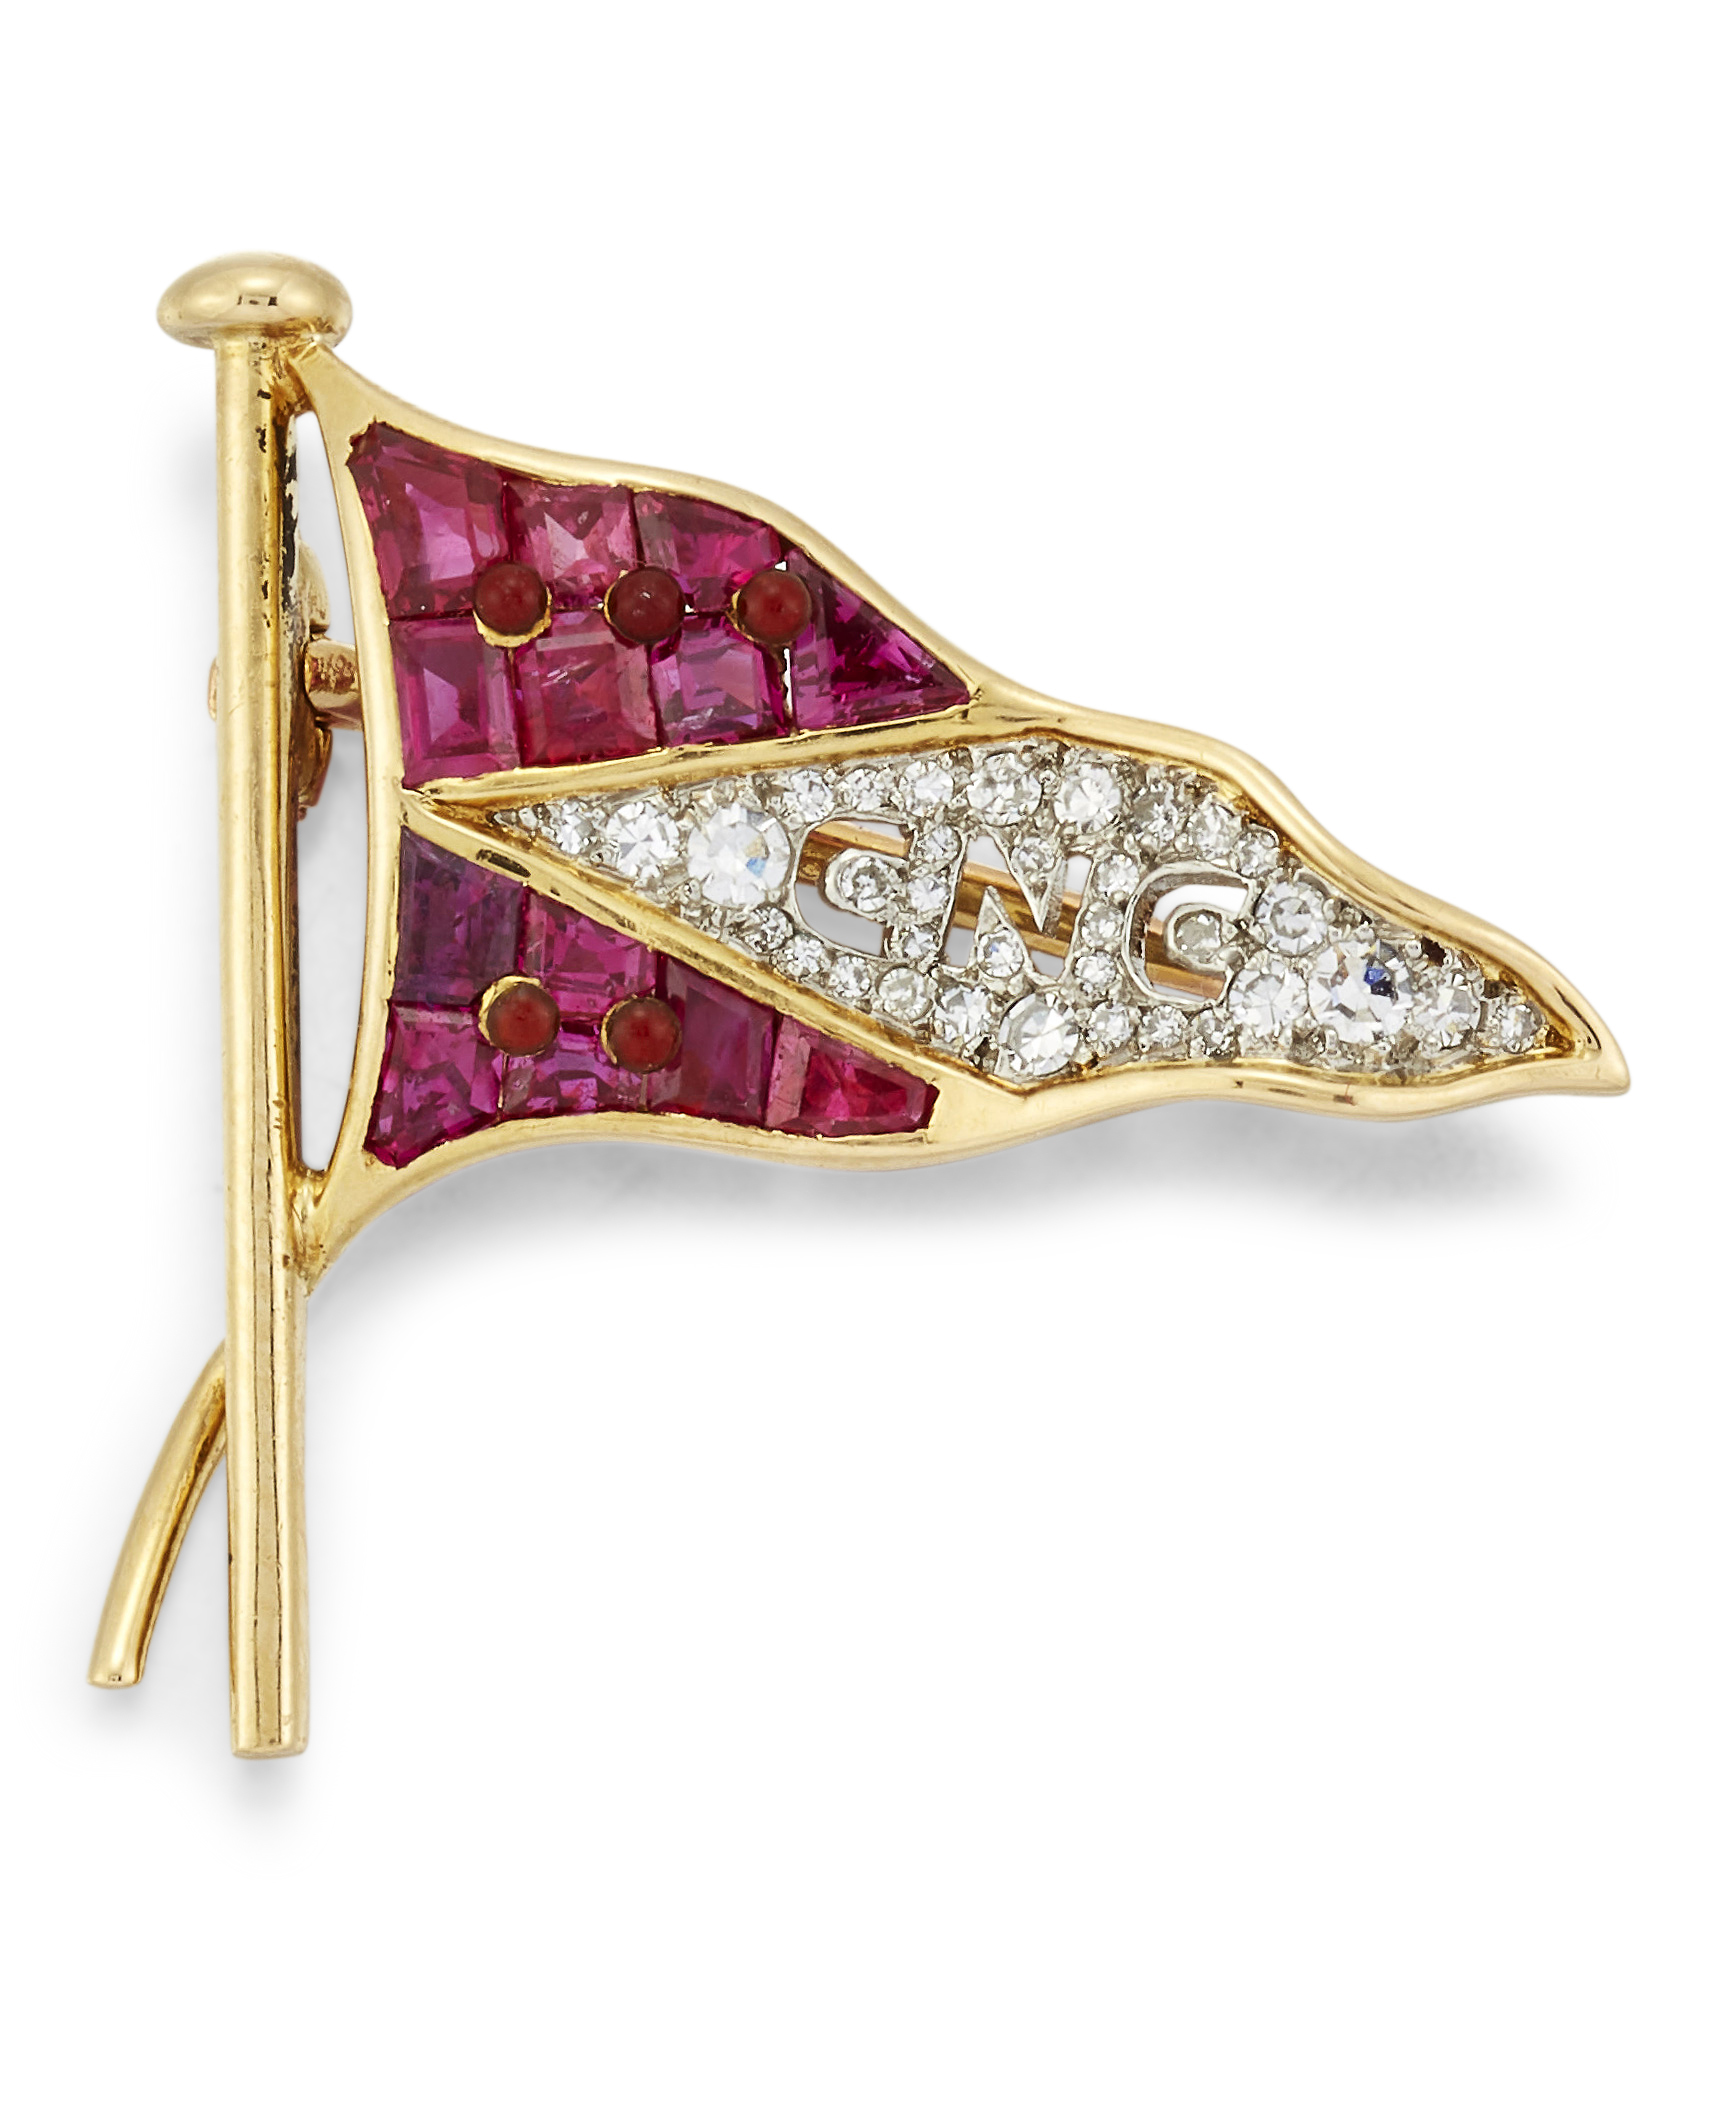 A CARTIER 18CT RUBY AND DIAMOND BURGEE BROOCH,